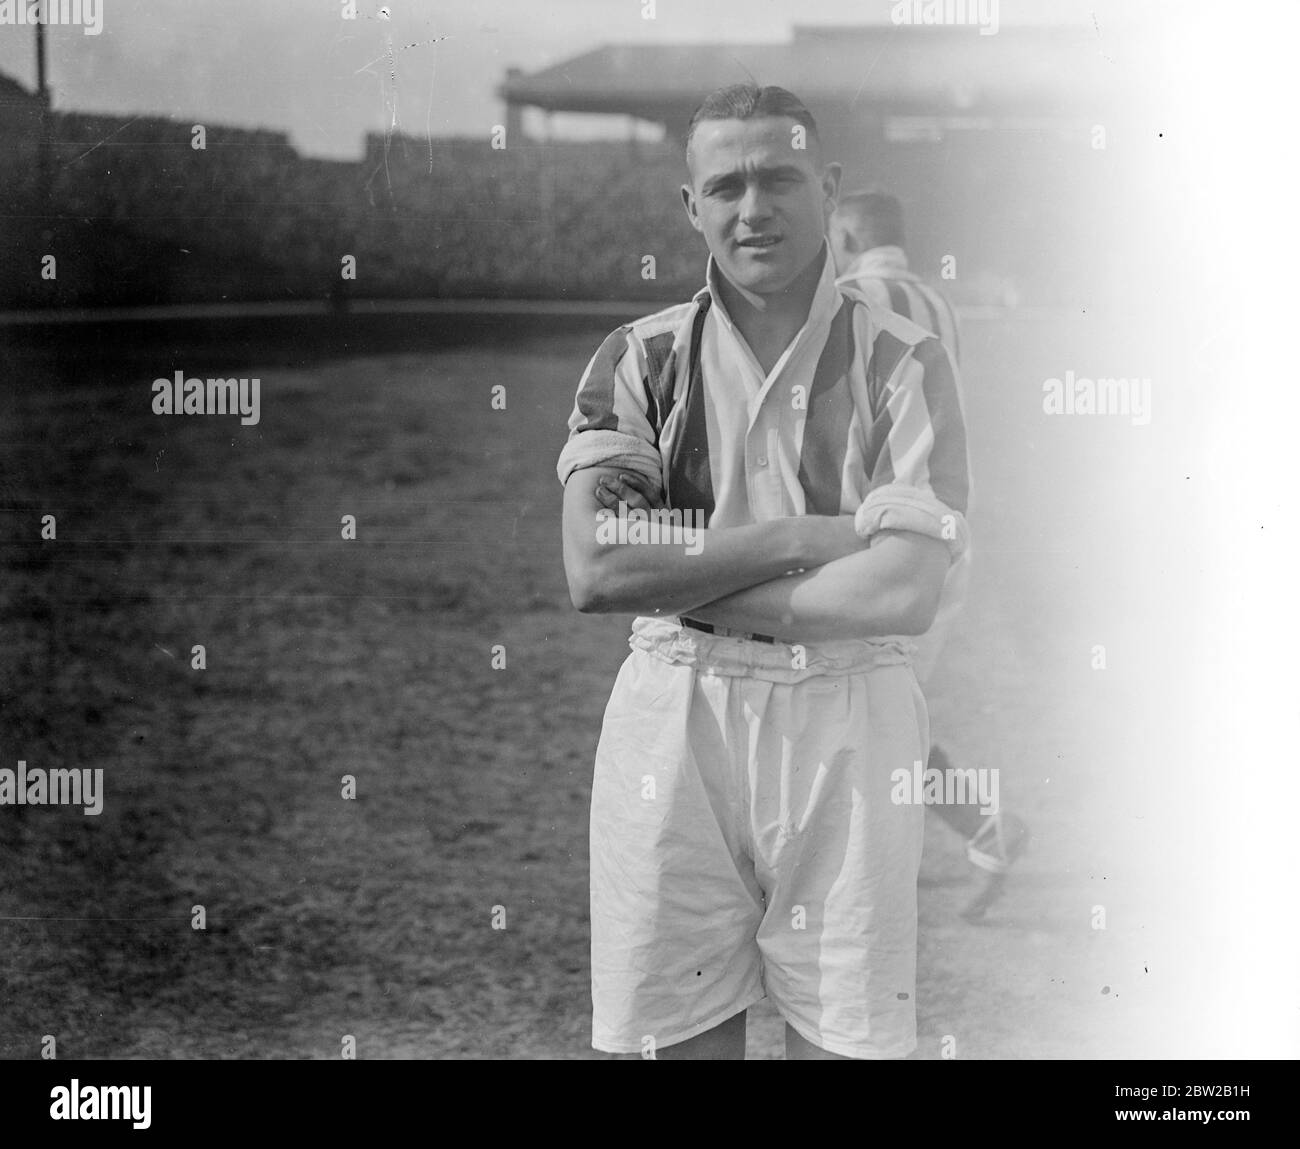 West Bromwich Albion Football club 1935-36. William Ginger Richardson, centre forward. 10 April 1936 Stock Photo